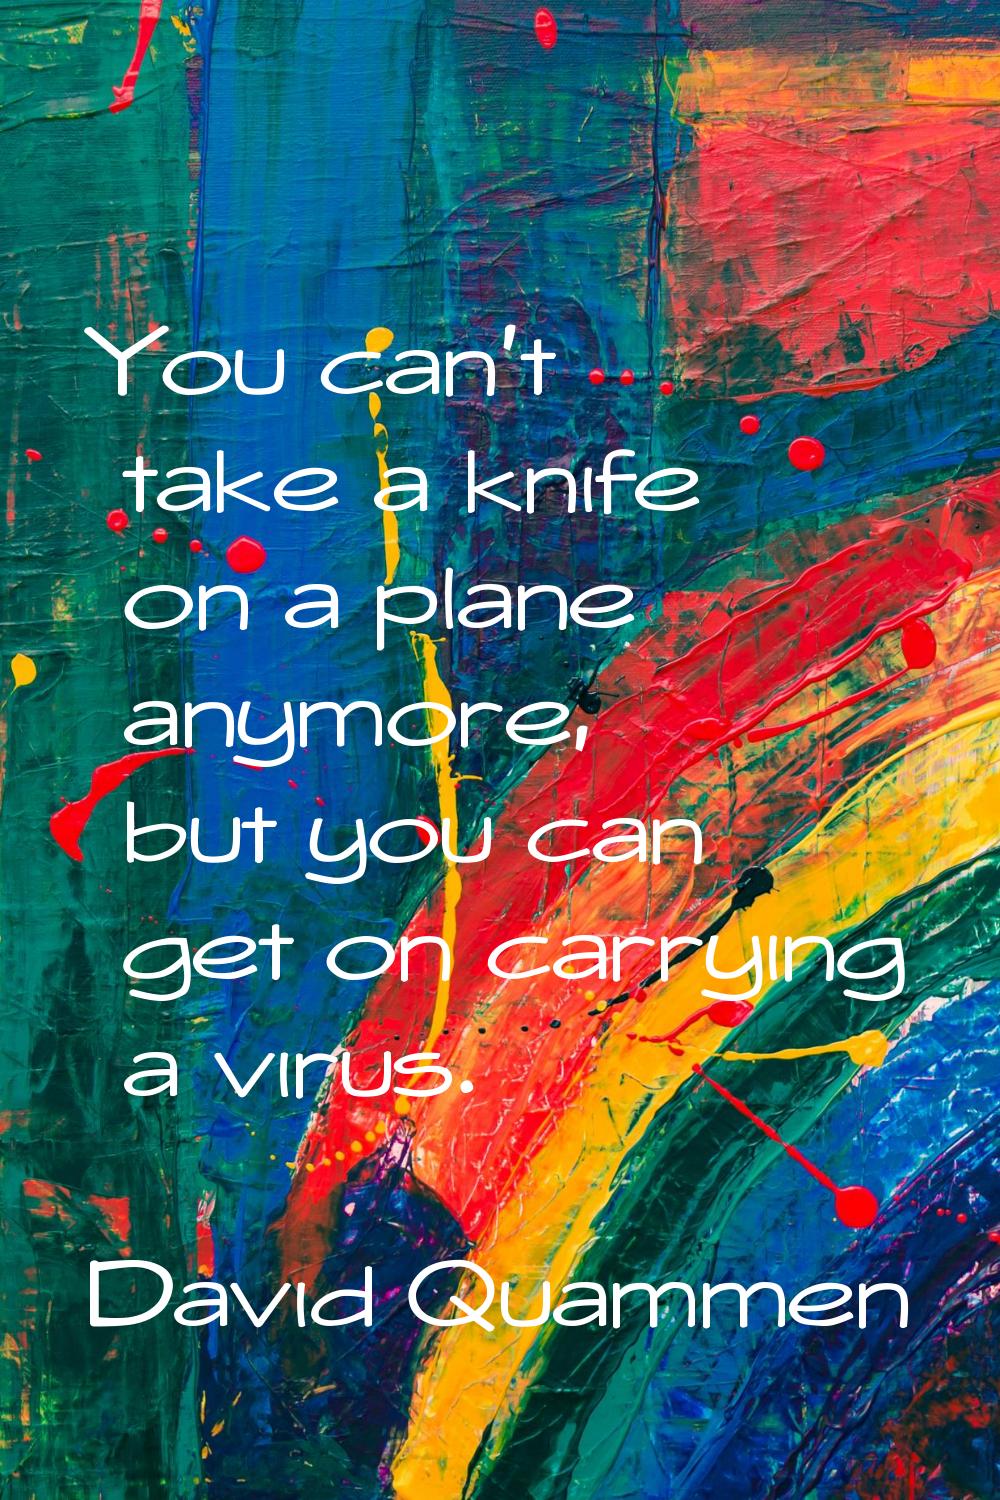 You can't take a knife on a plane anymore, but you can get on carrying a virus.